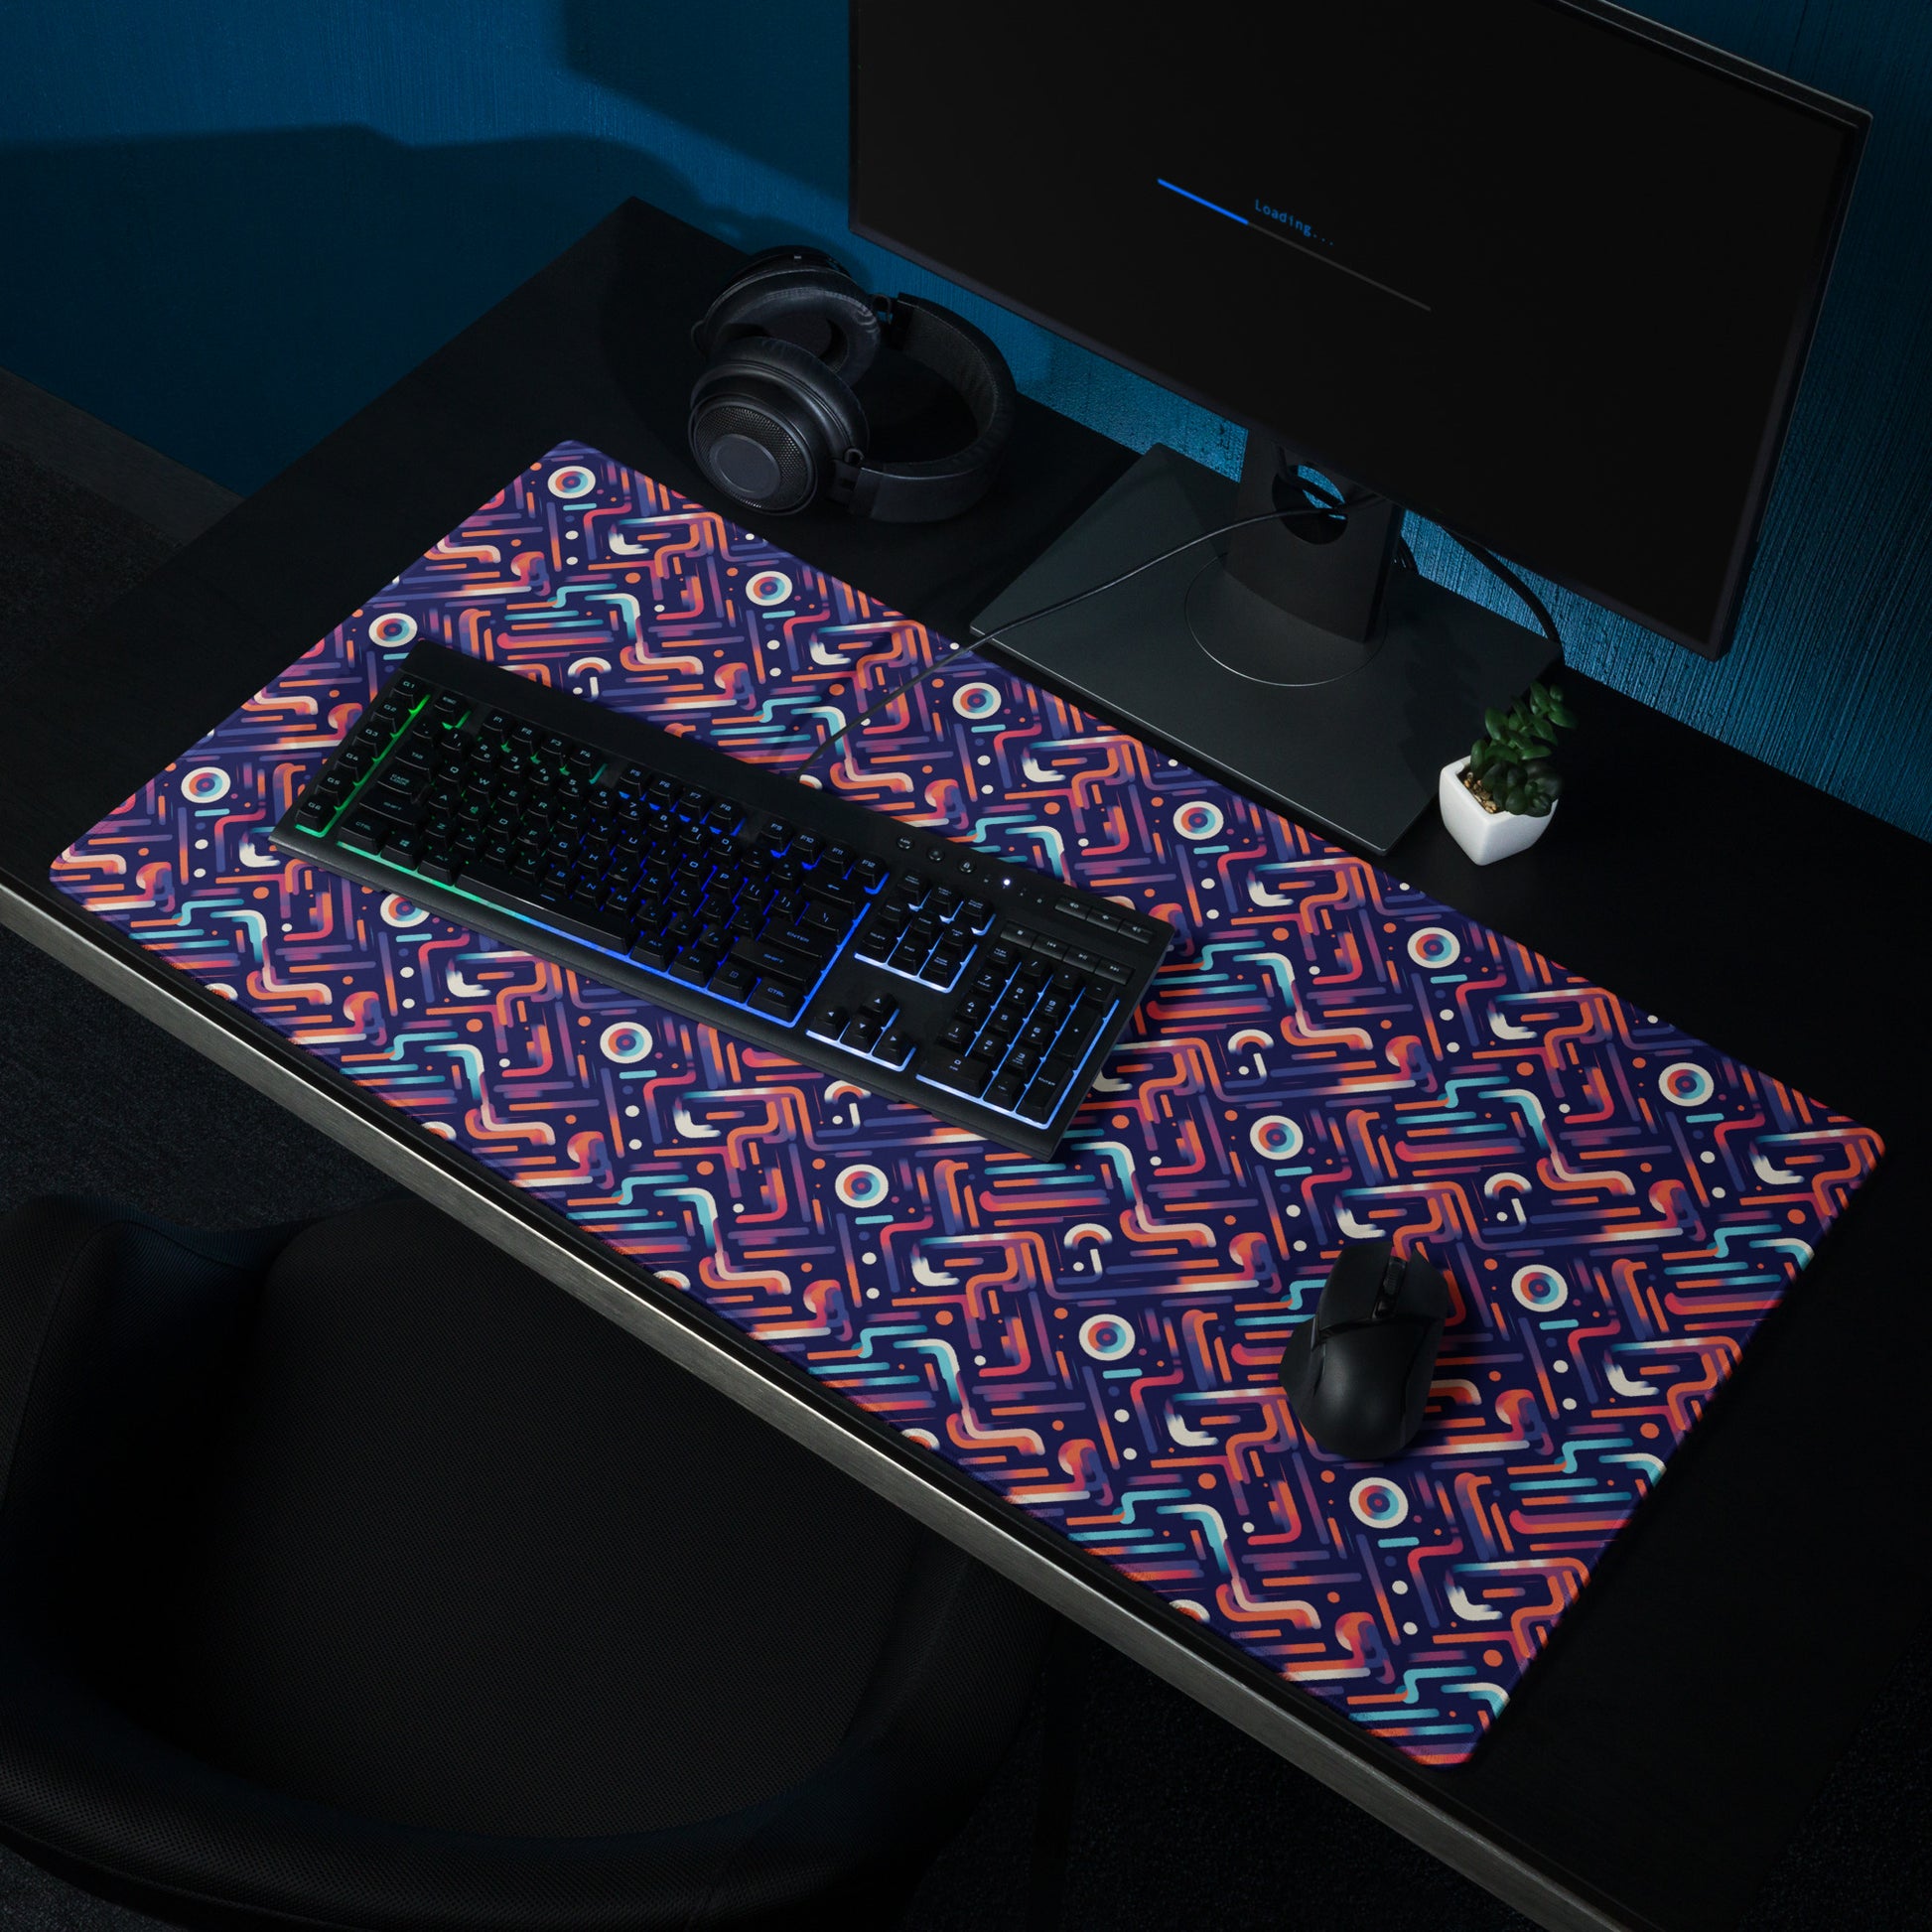 A 36" x 18" gaming desk pad with blue, orange, and purple lines on a dark blue background. A keyboard and mouse sit on it.